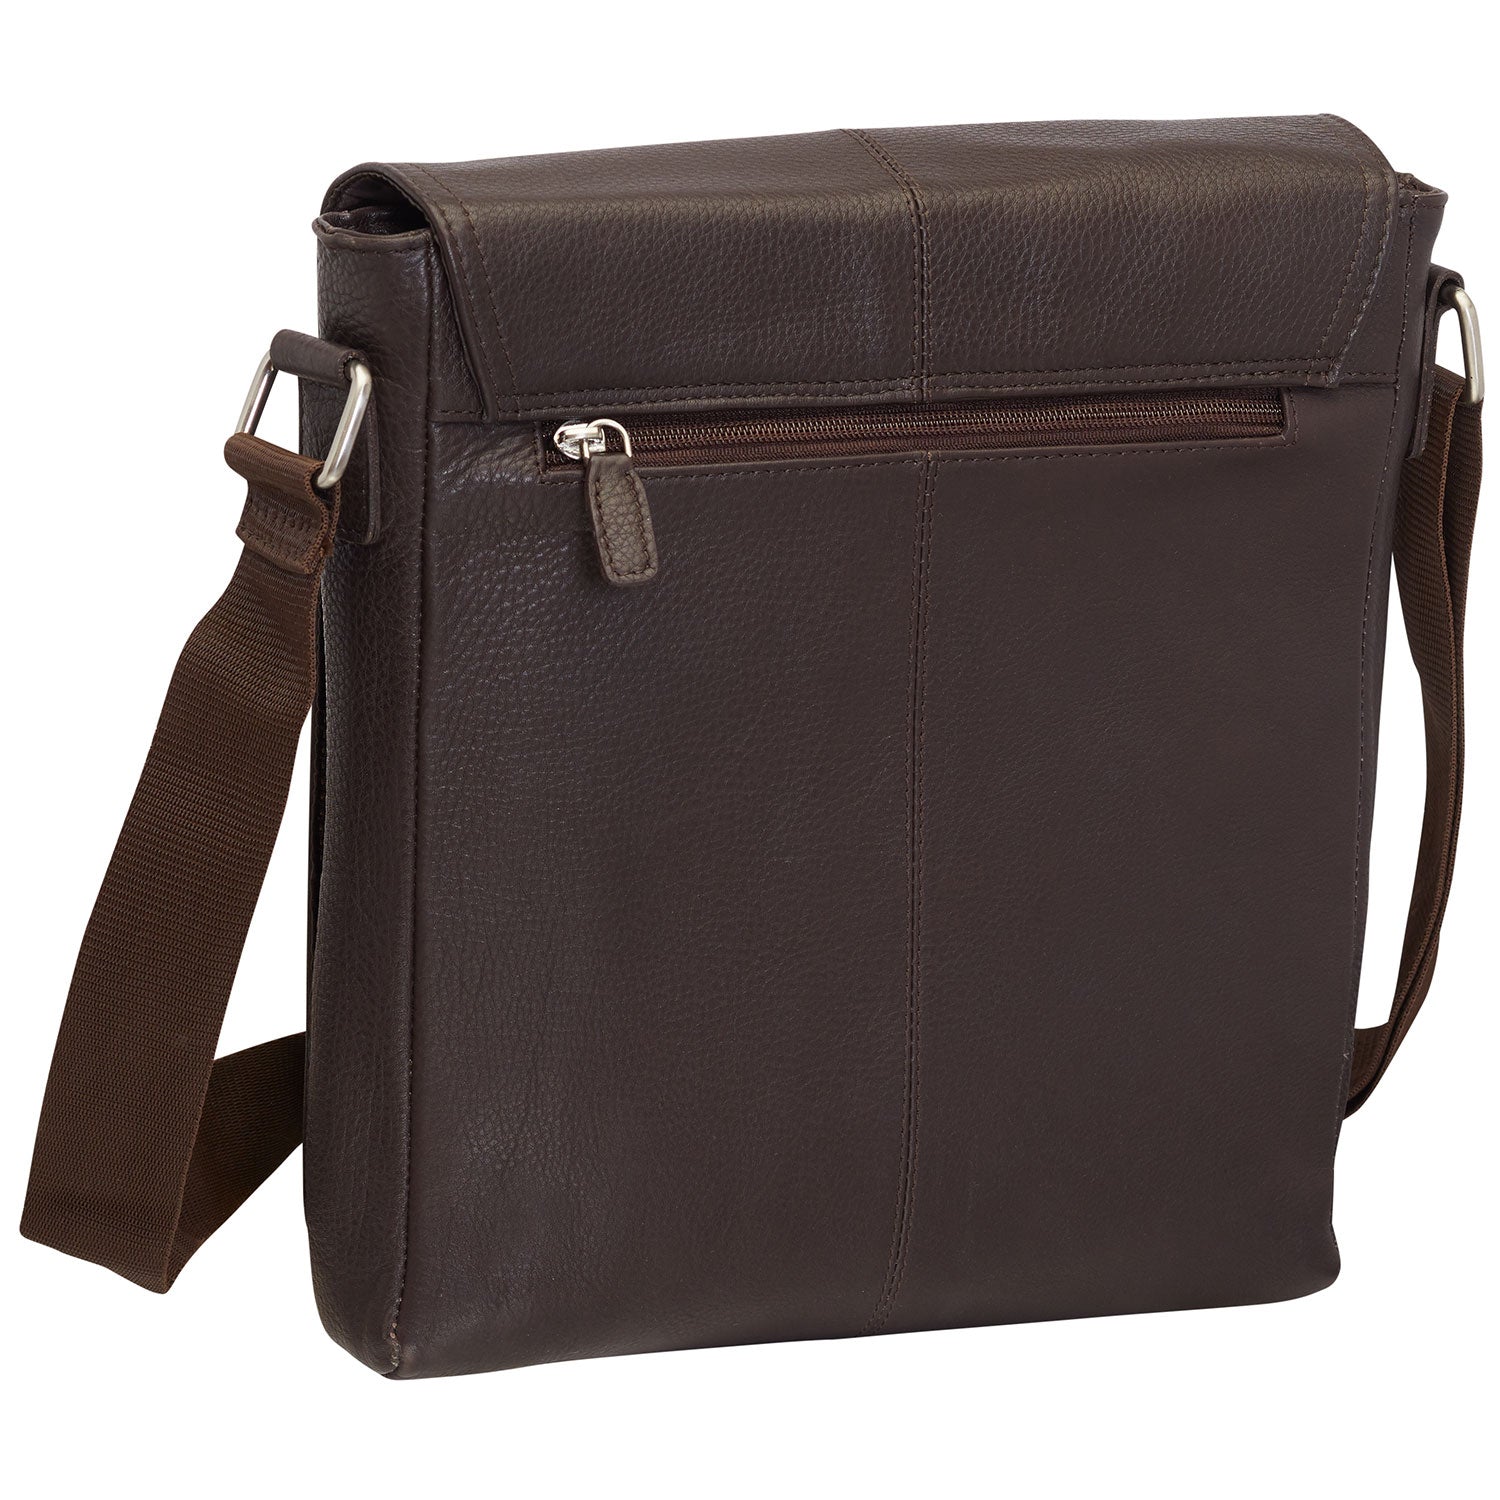 Mancini Leather Messenger Style Unisex Bag for Tablet/ E-reader, 10.25" x 3" x 12", Brown